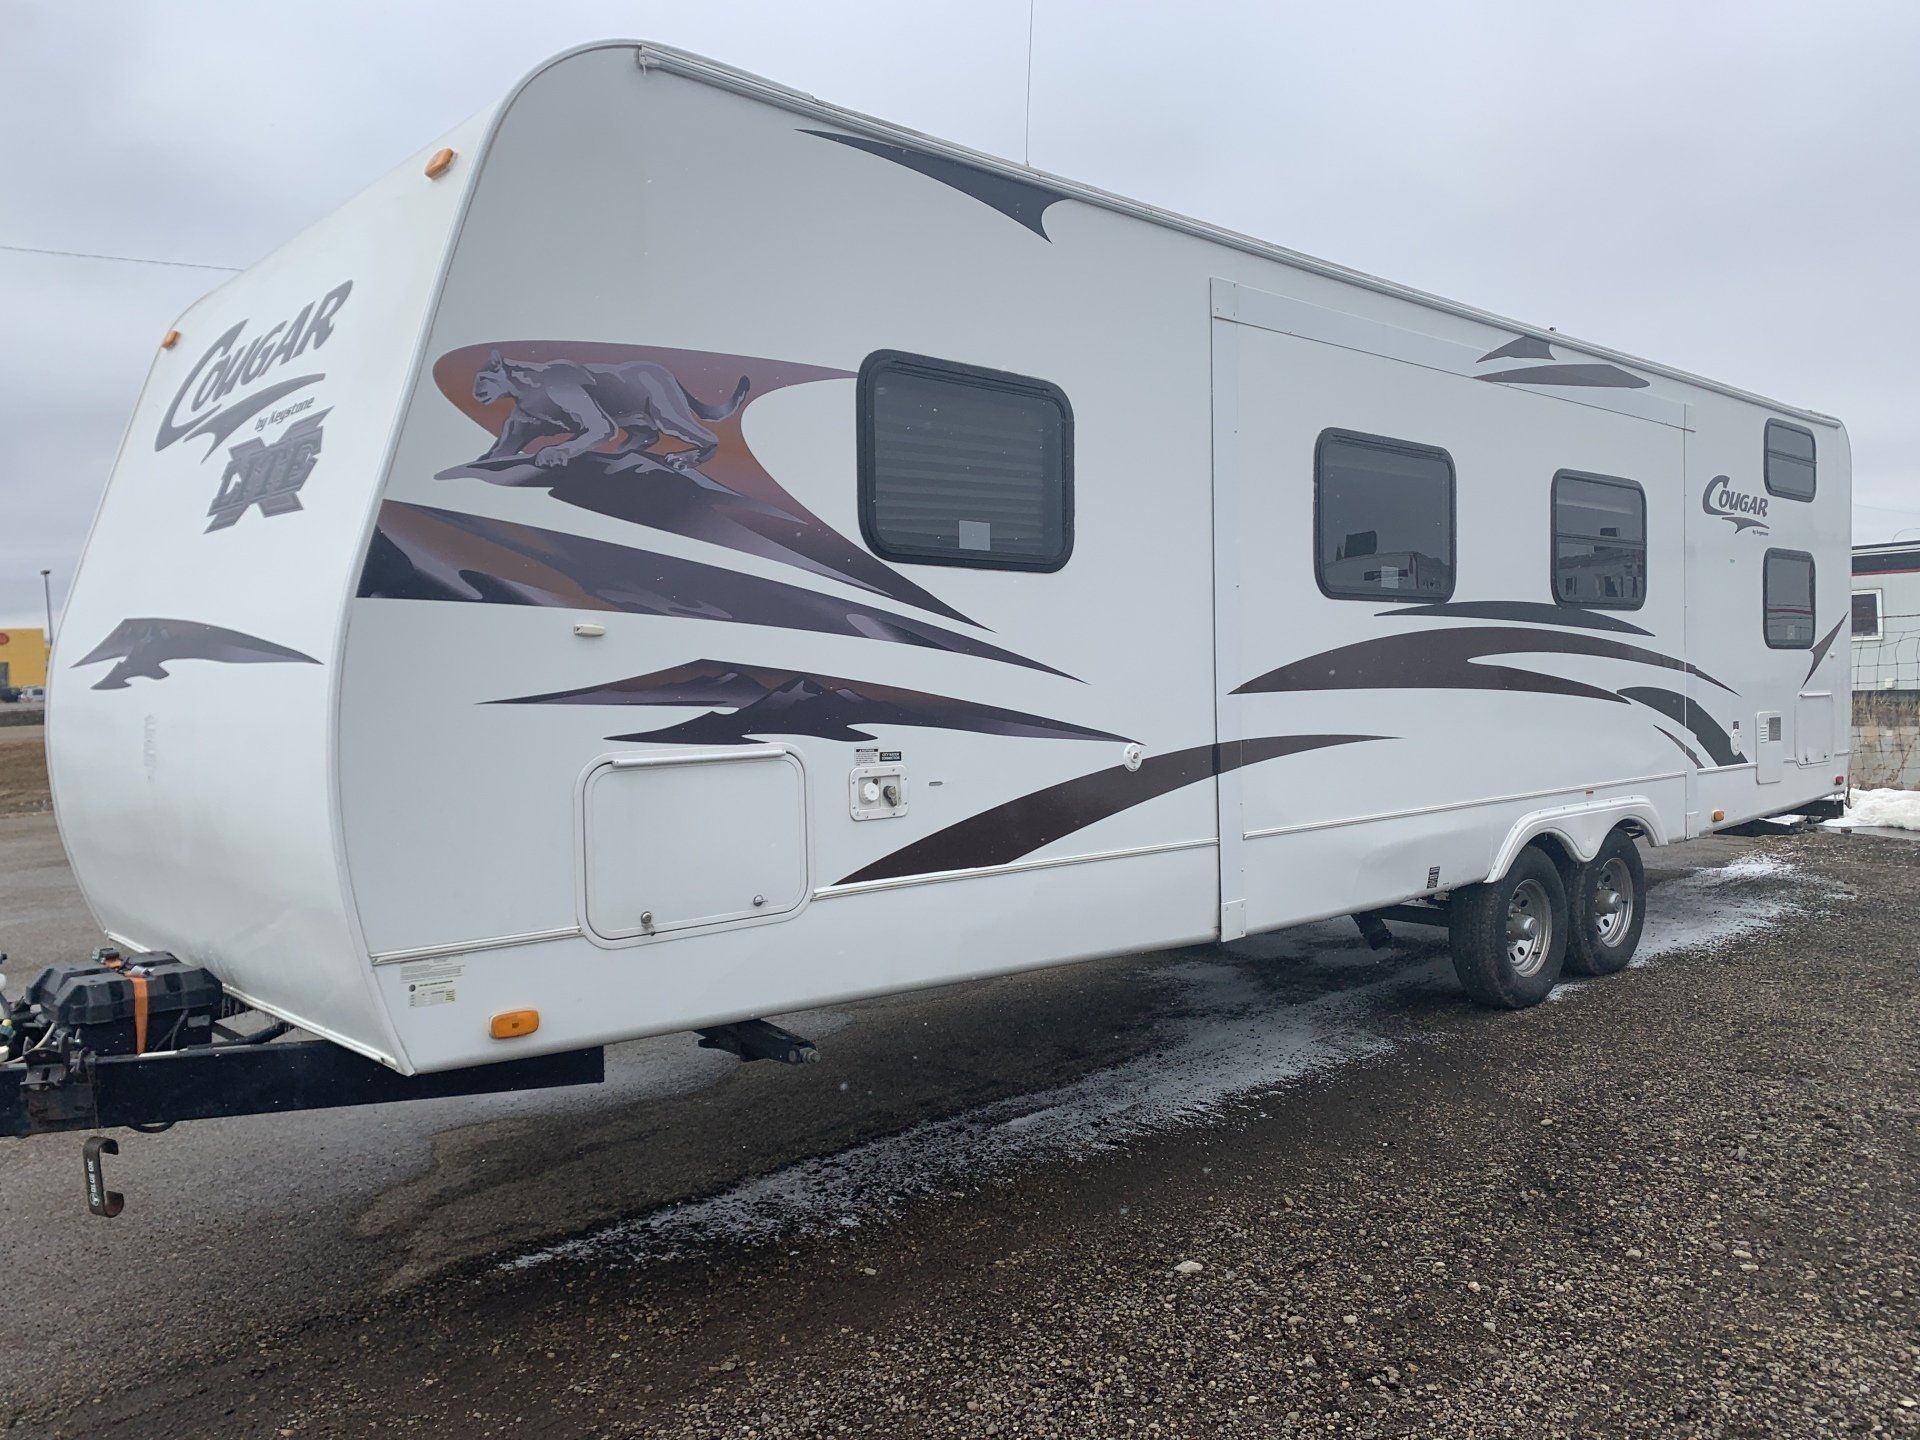 2020 - Alberta's Worst RV Decal Contest - Grand Prize Winner - Before & After - Pic 1